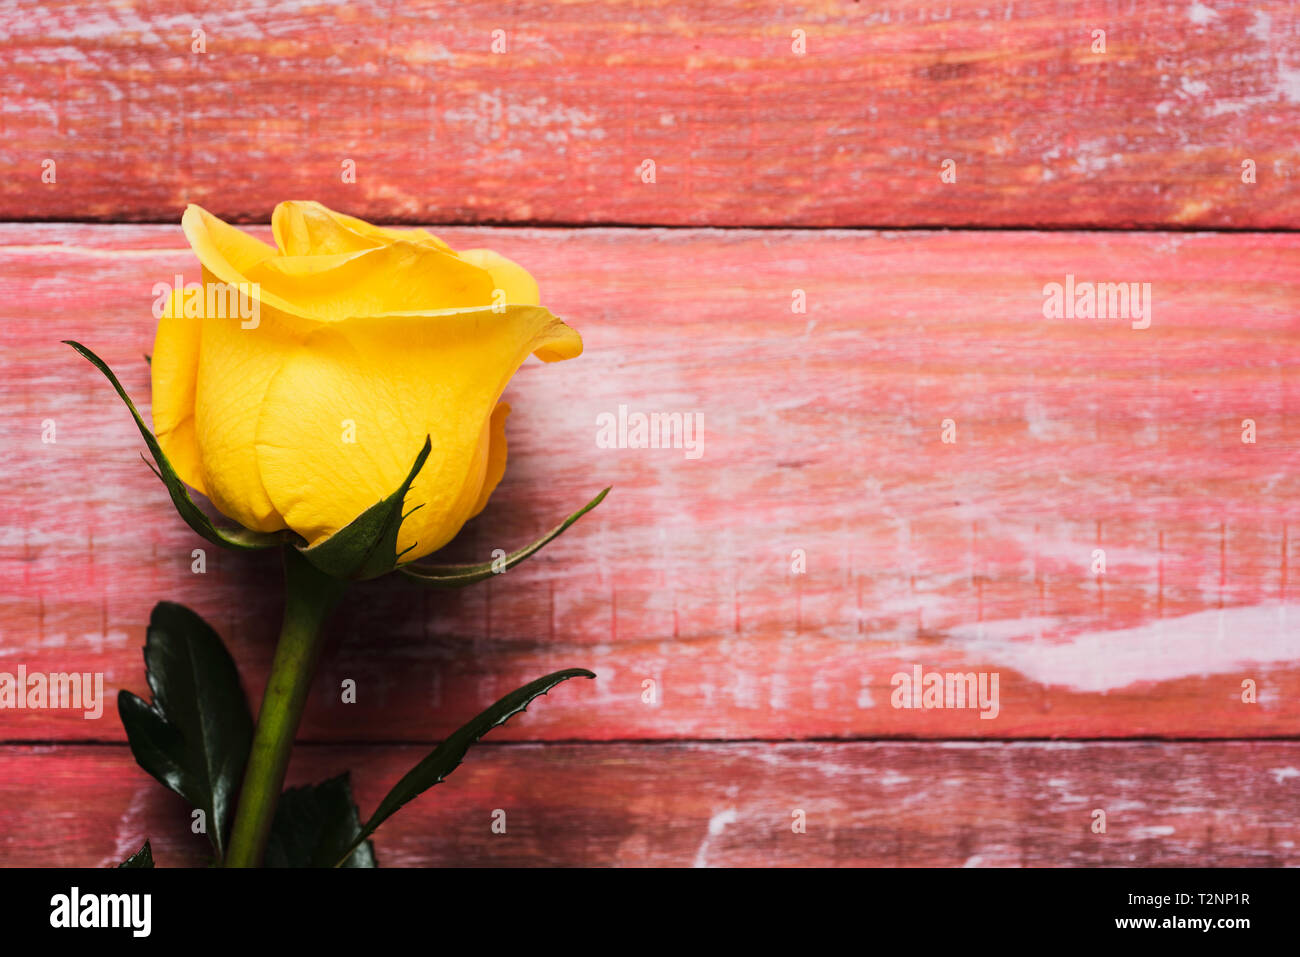 closeup of a yellow rose on a red rustic wooden surface with some blank space on the right Stock Photo